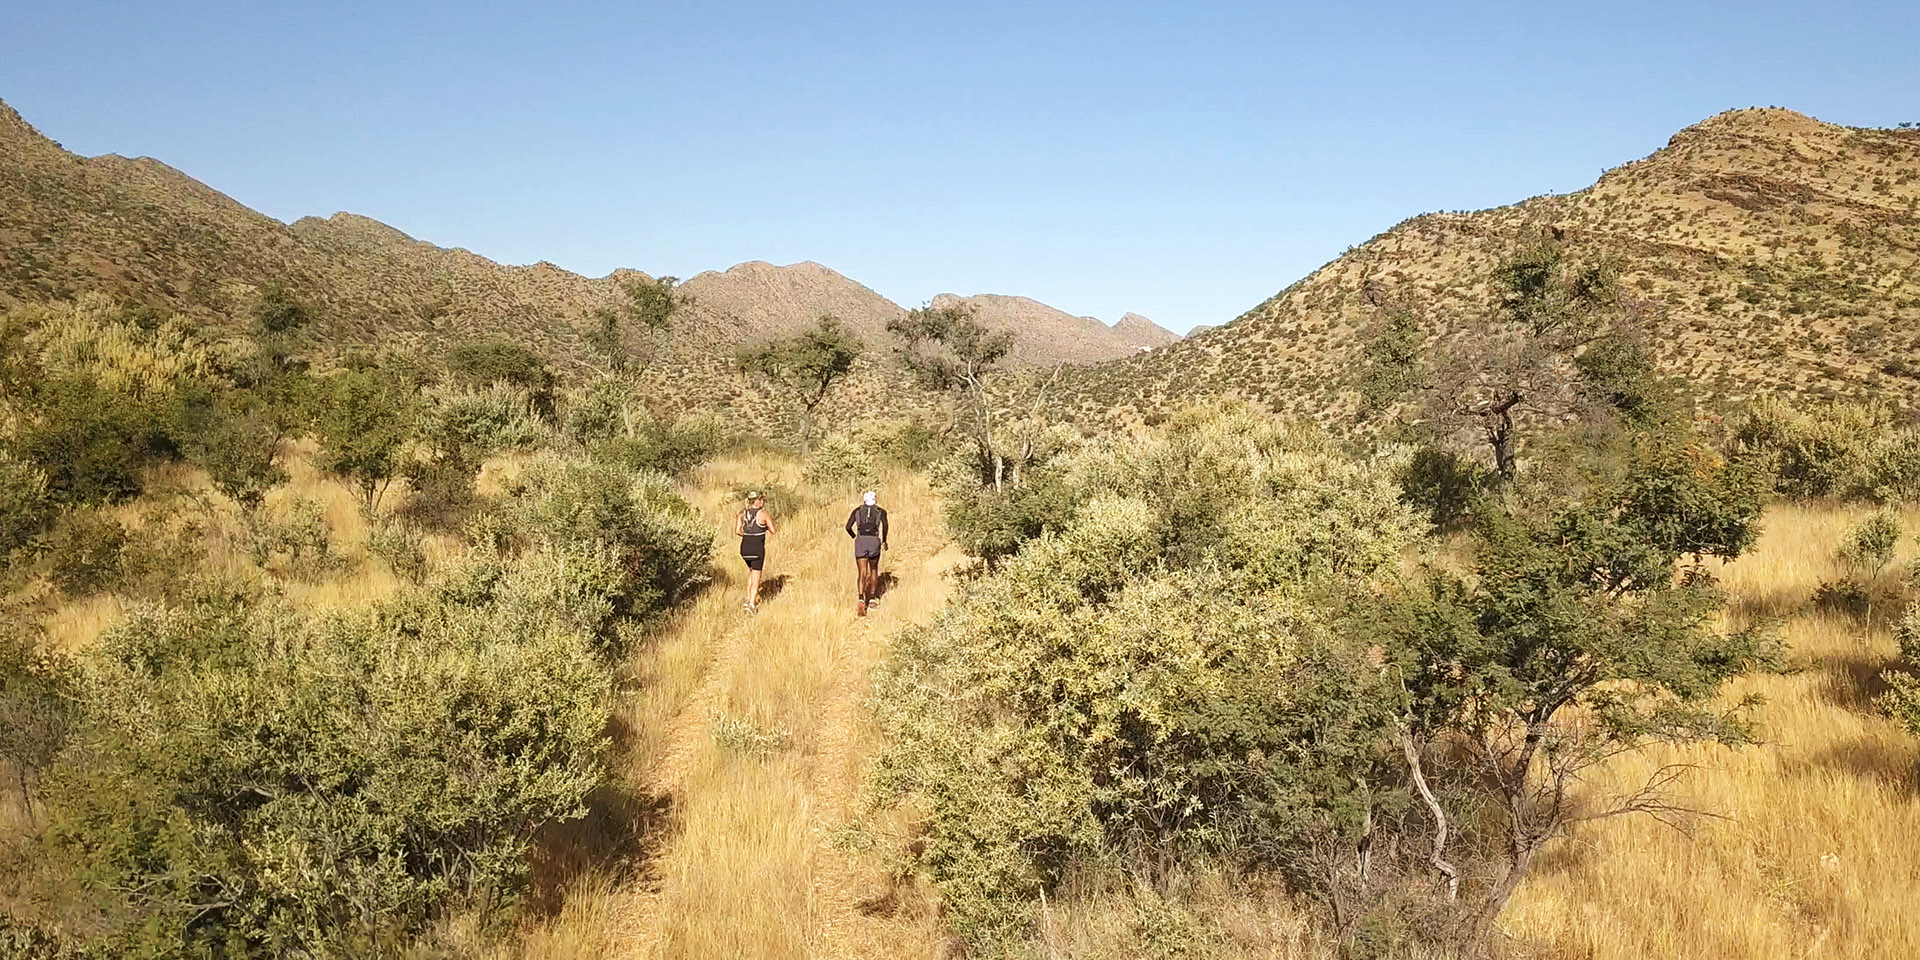 Trail Runners in the Auas Mountains in Namibia